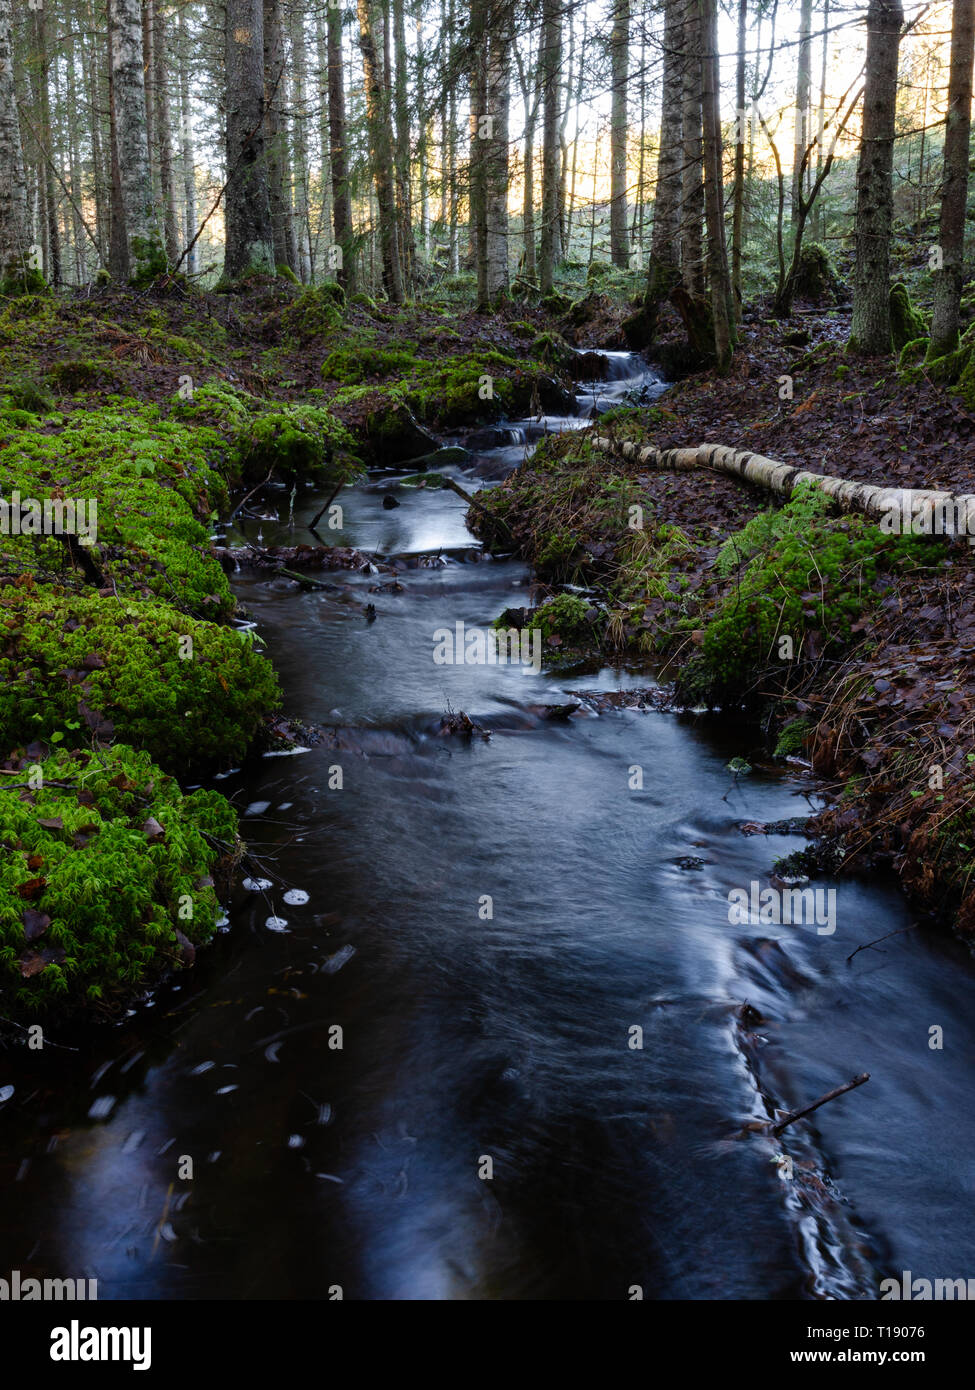 A dark forest creek slowly flowing Stock Photo